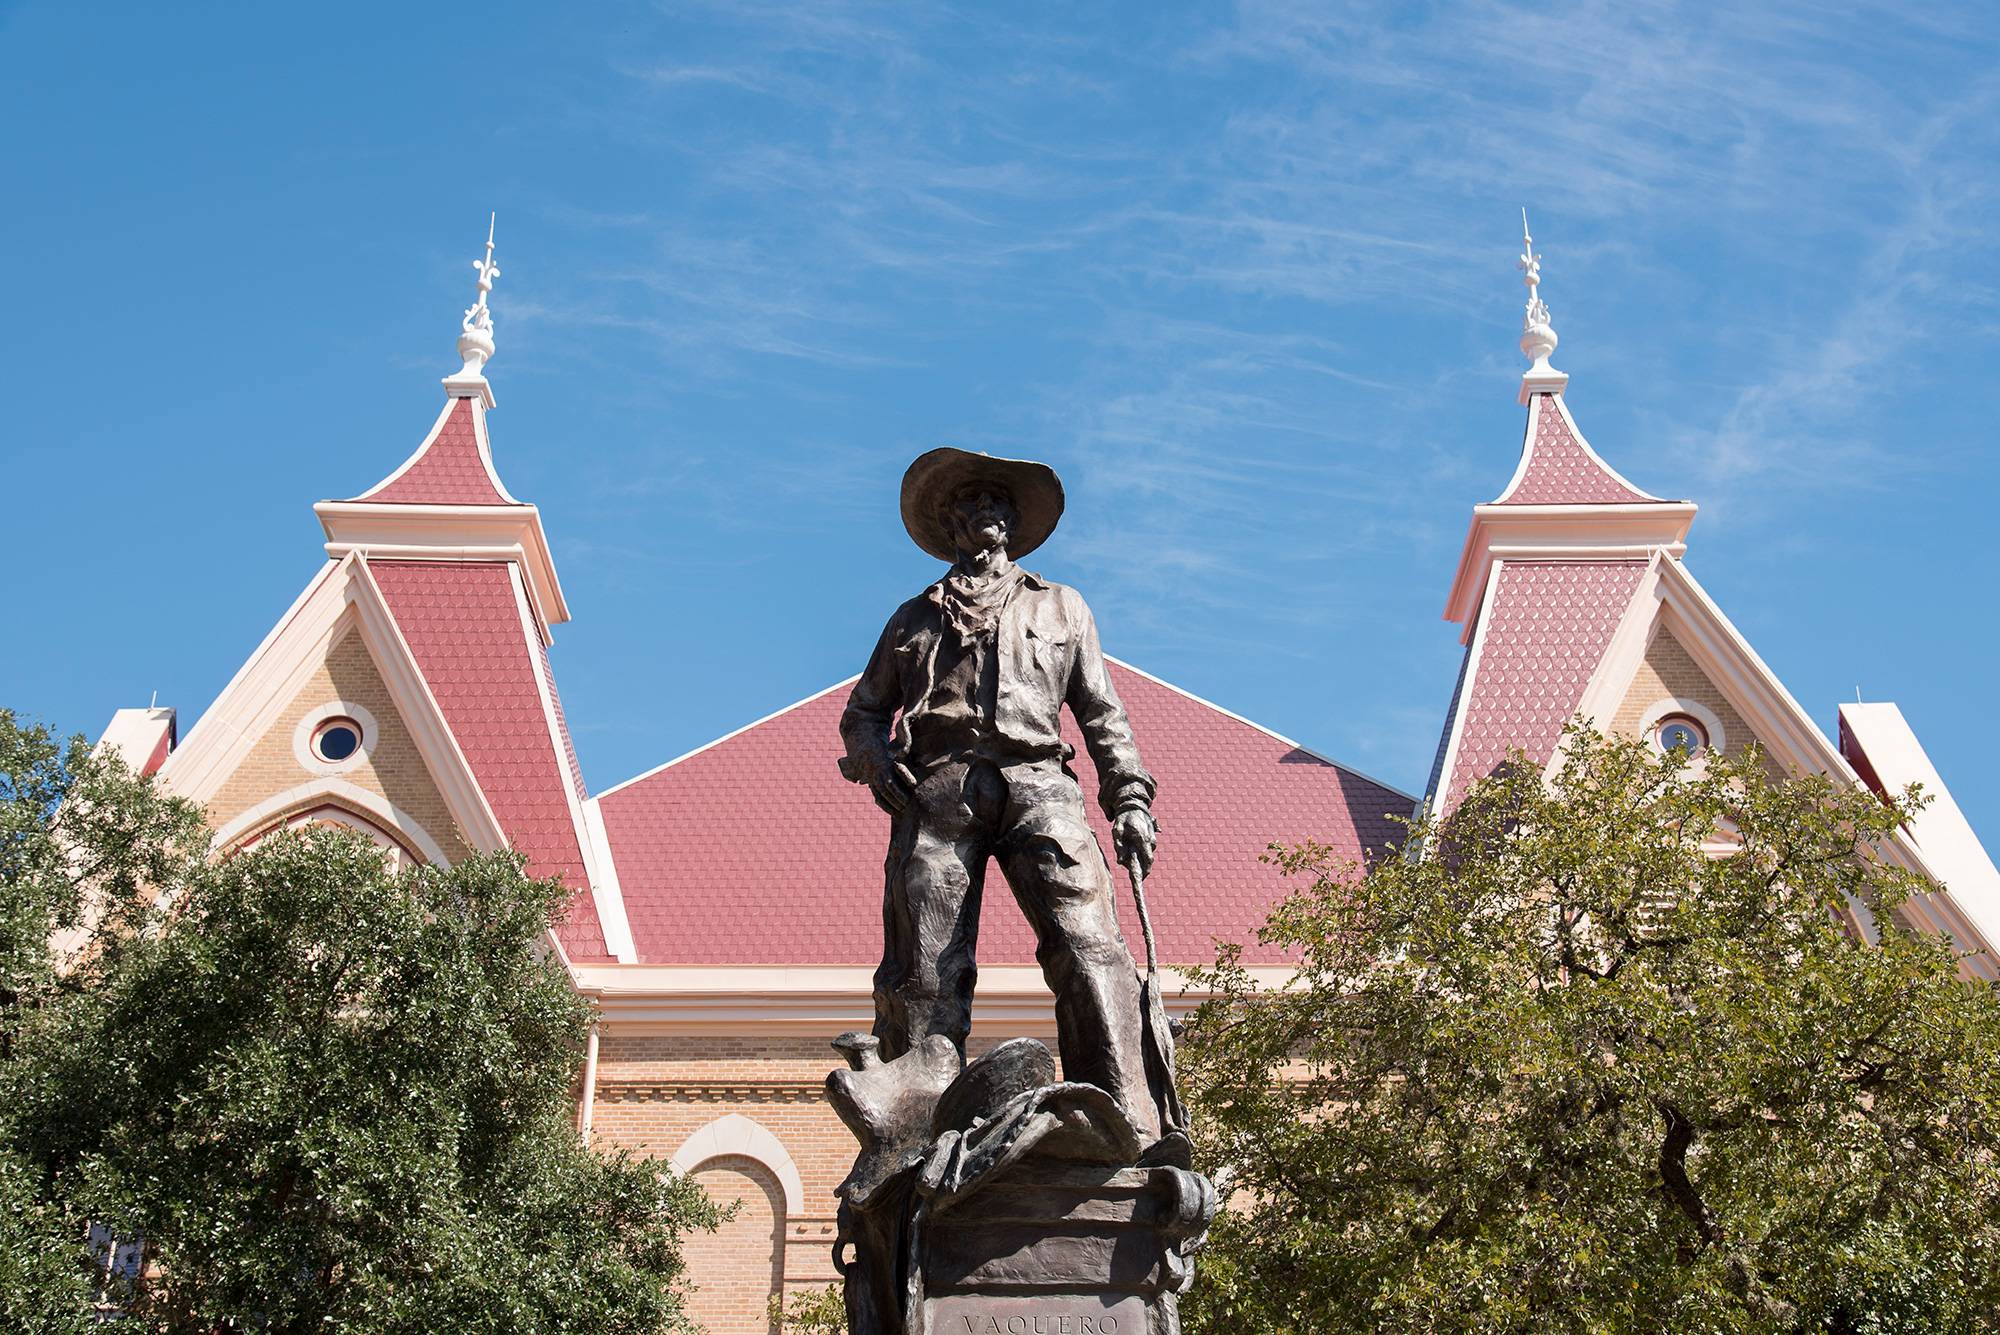 The vaquero statue by Old Main